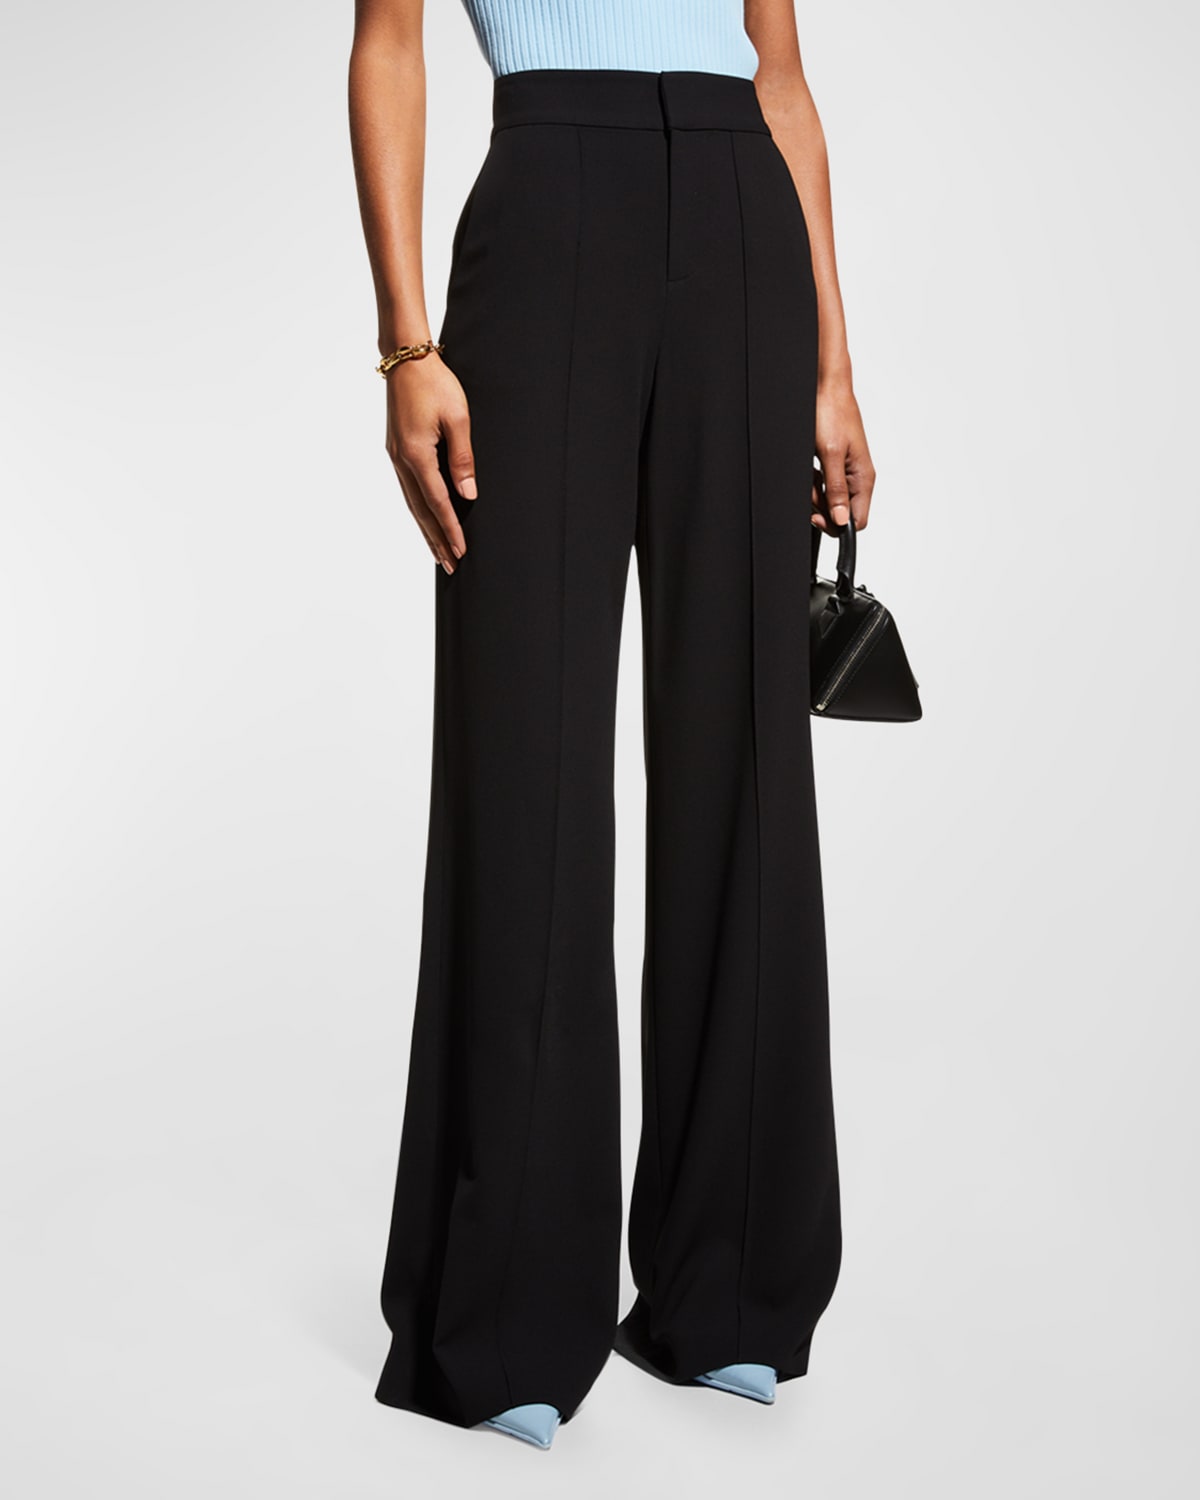 Topshop ribbed flare trousers in grey marl